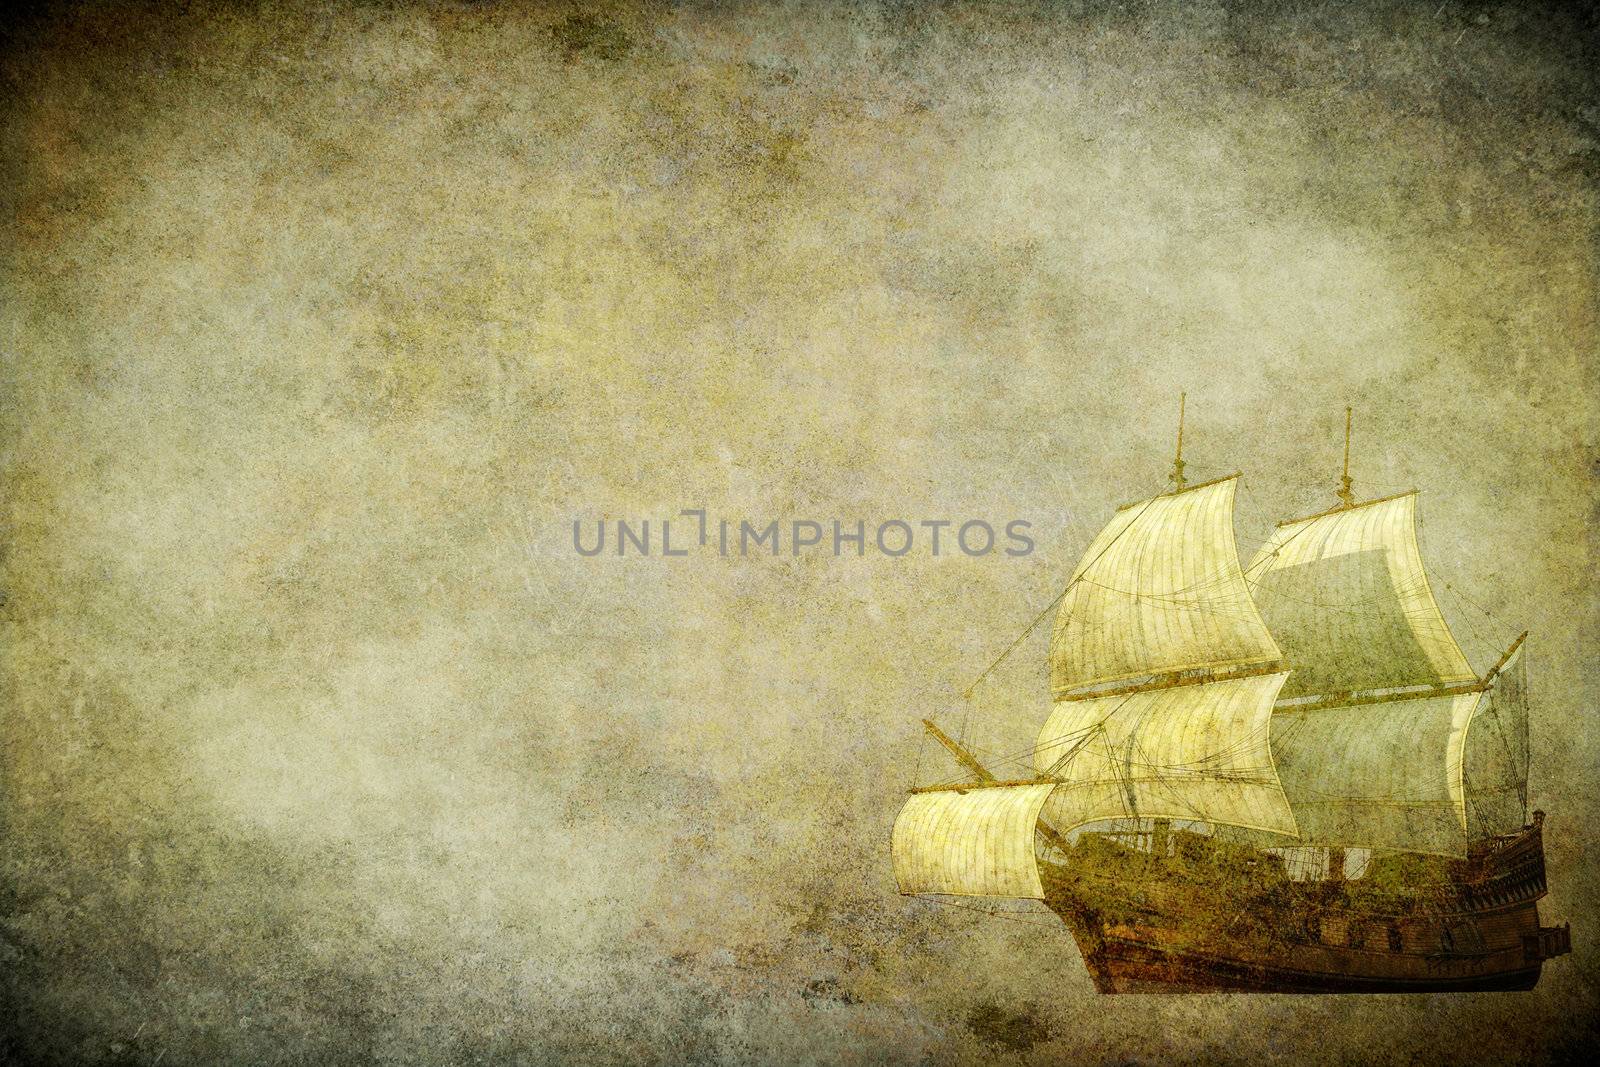 The sailing ship on the old brown paper